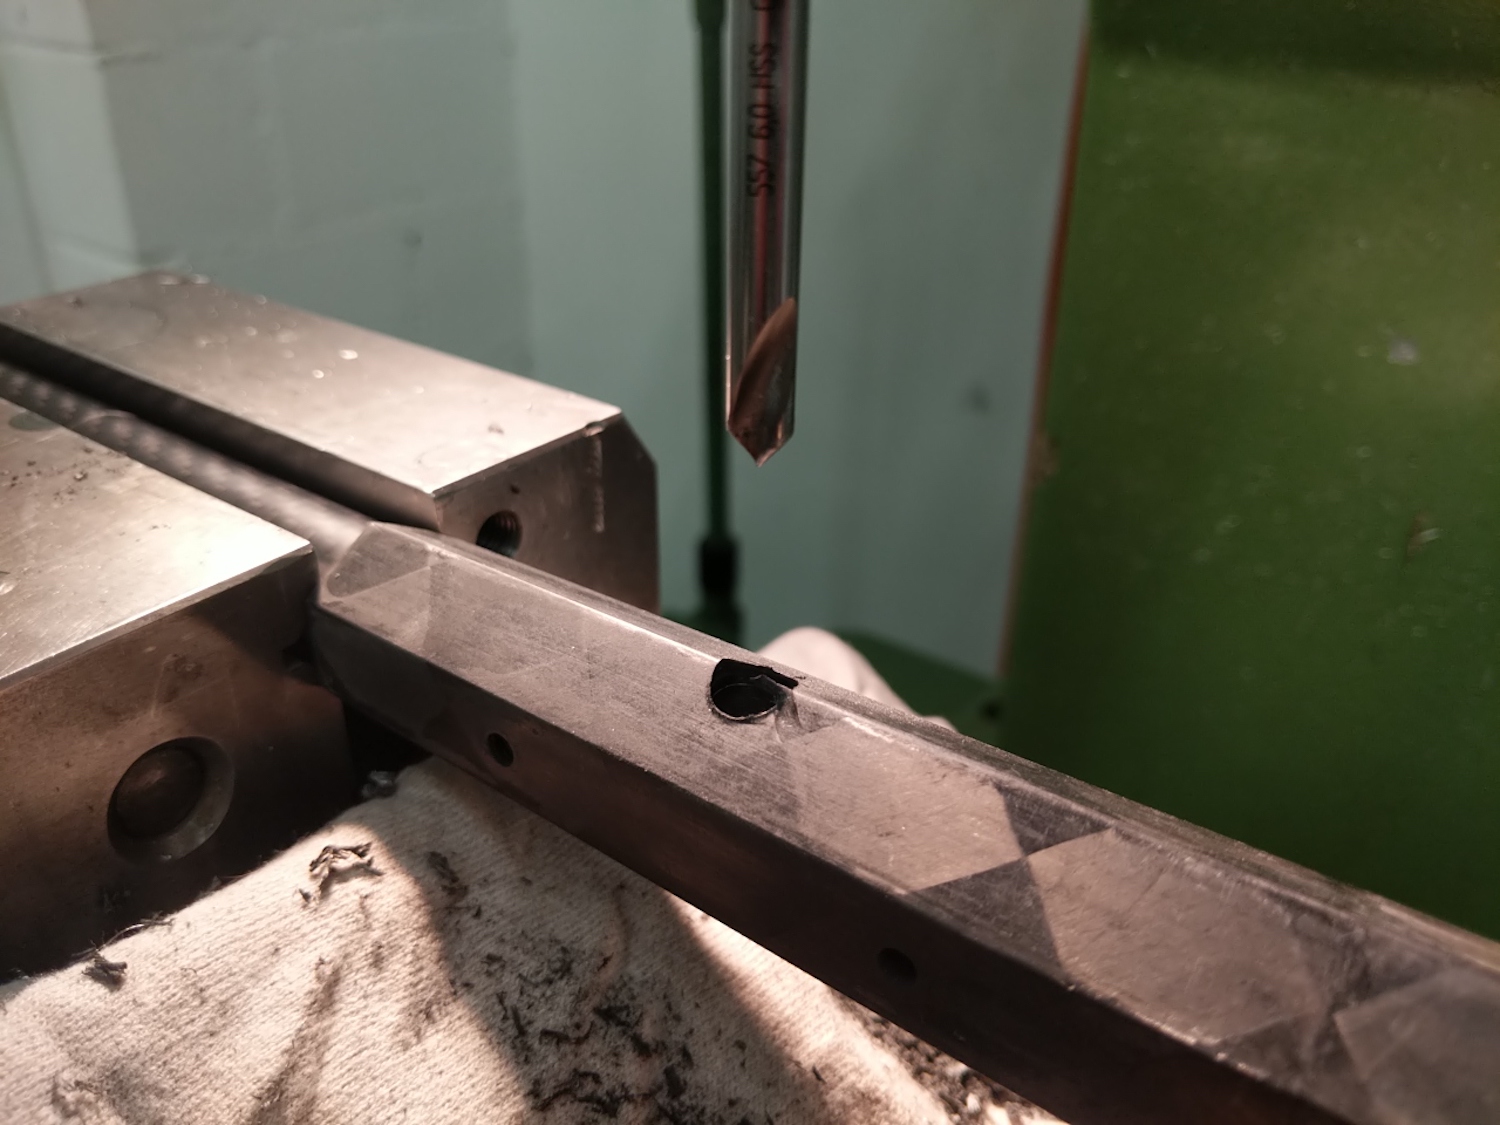 Drilling a centering hole